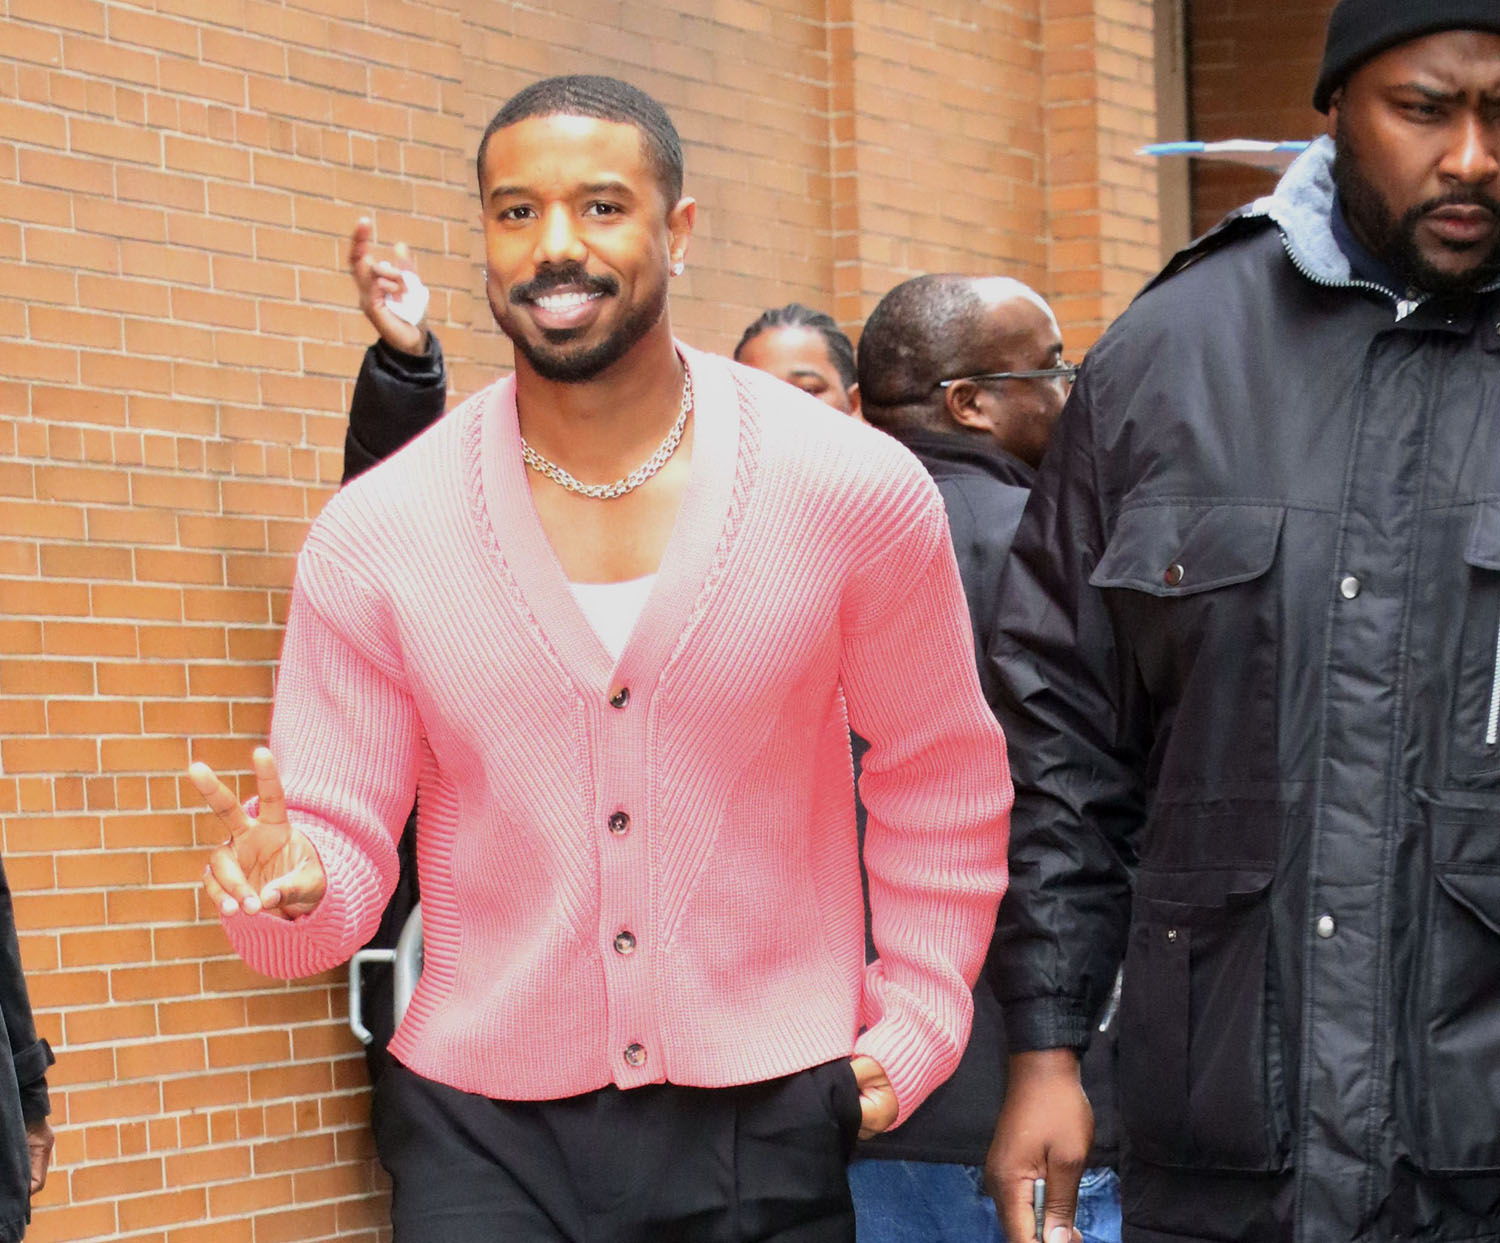 Michael B. Jordan tells The View's Sonny Hostin about why it was